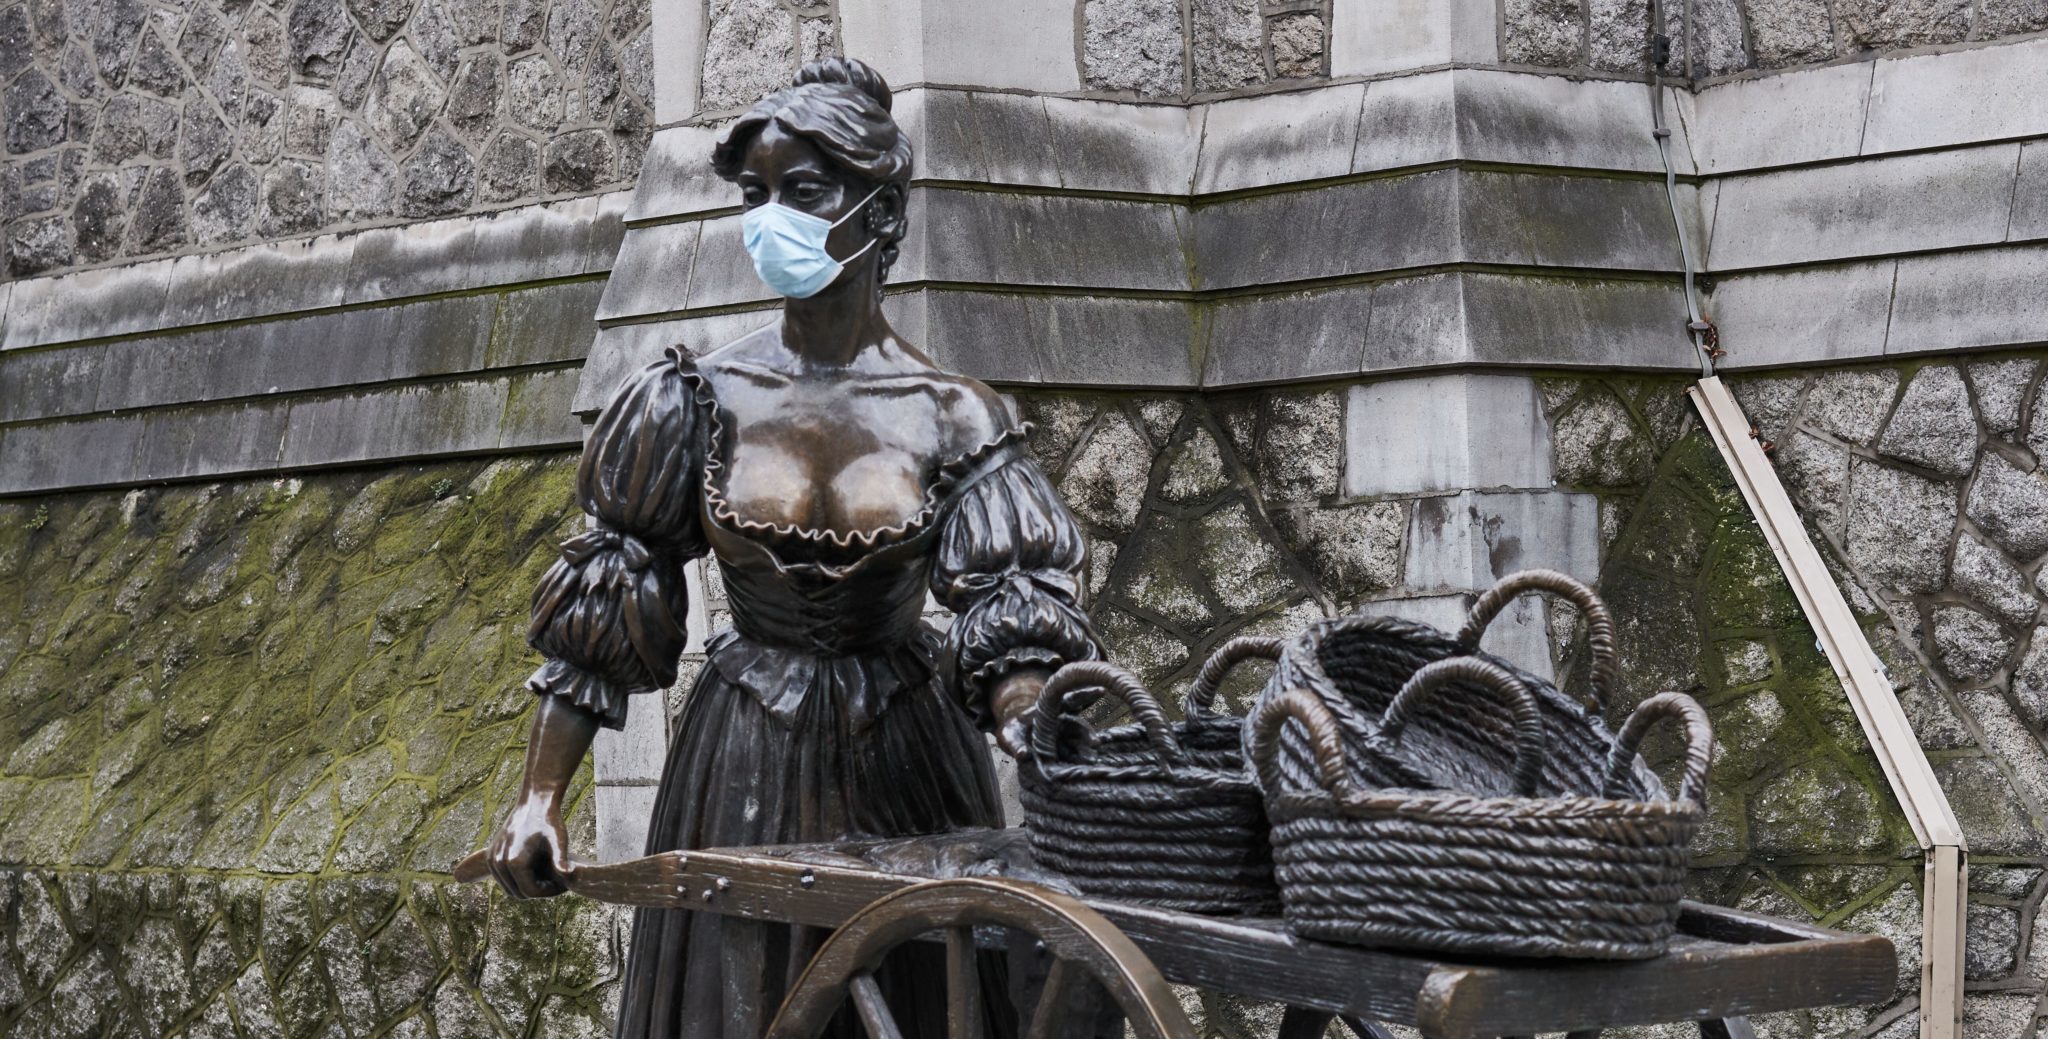 The Molly Malone statue in Dublin city with a facemask added during a coronavirus lockdown in November 2020.